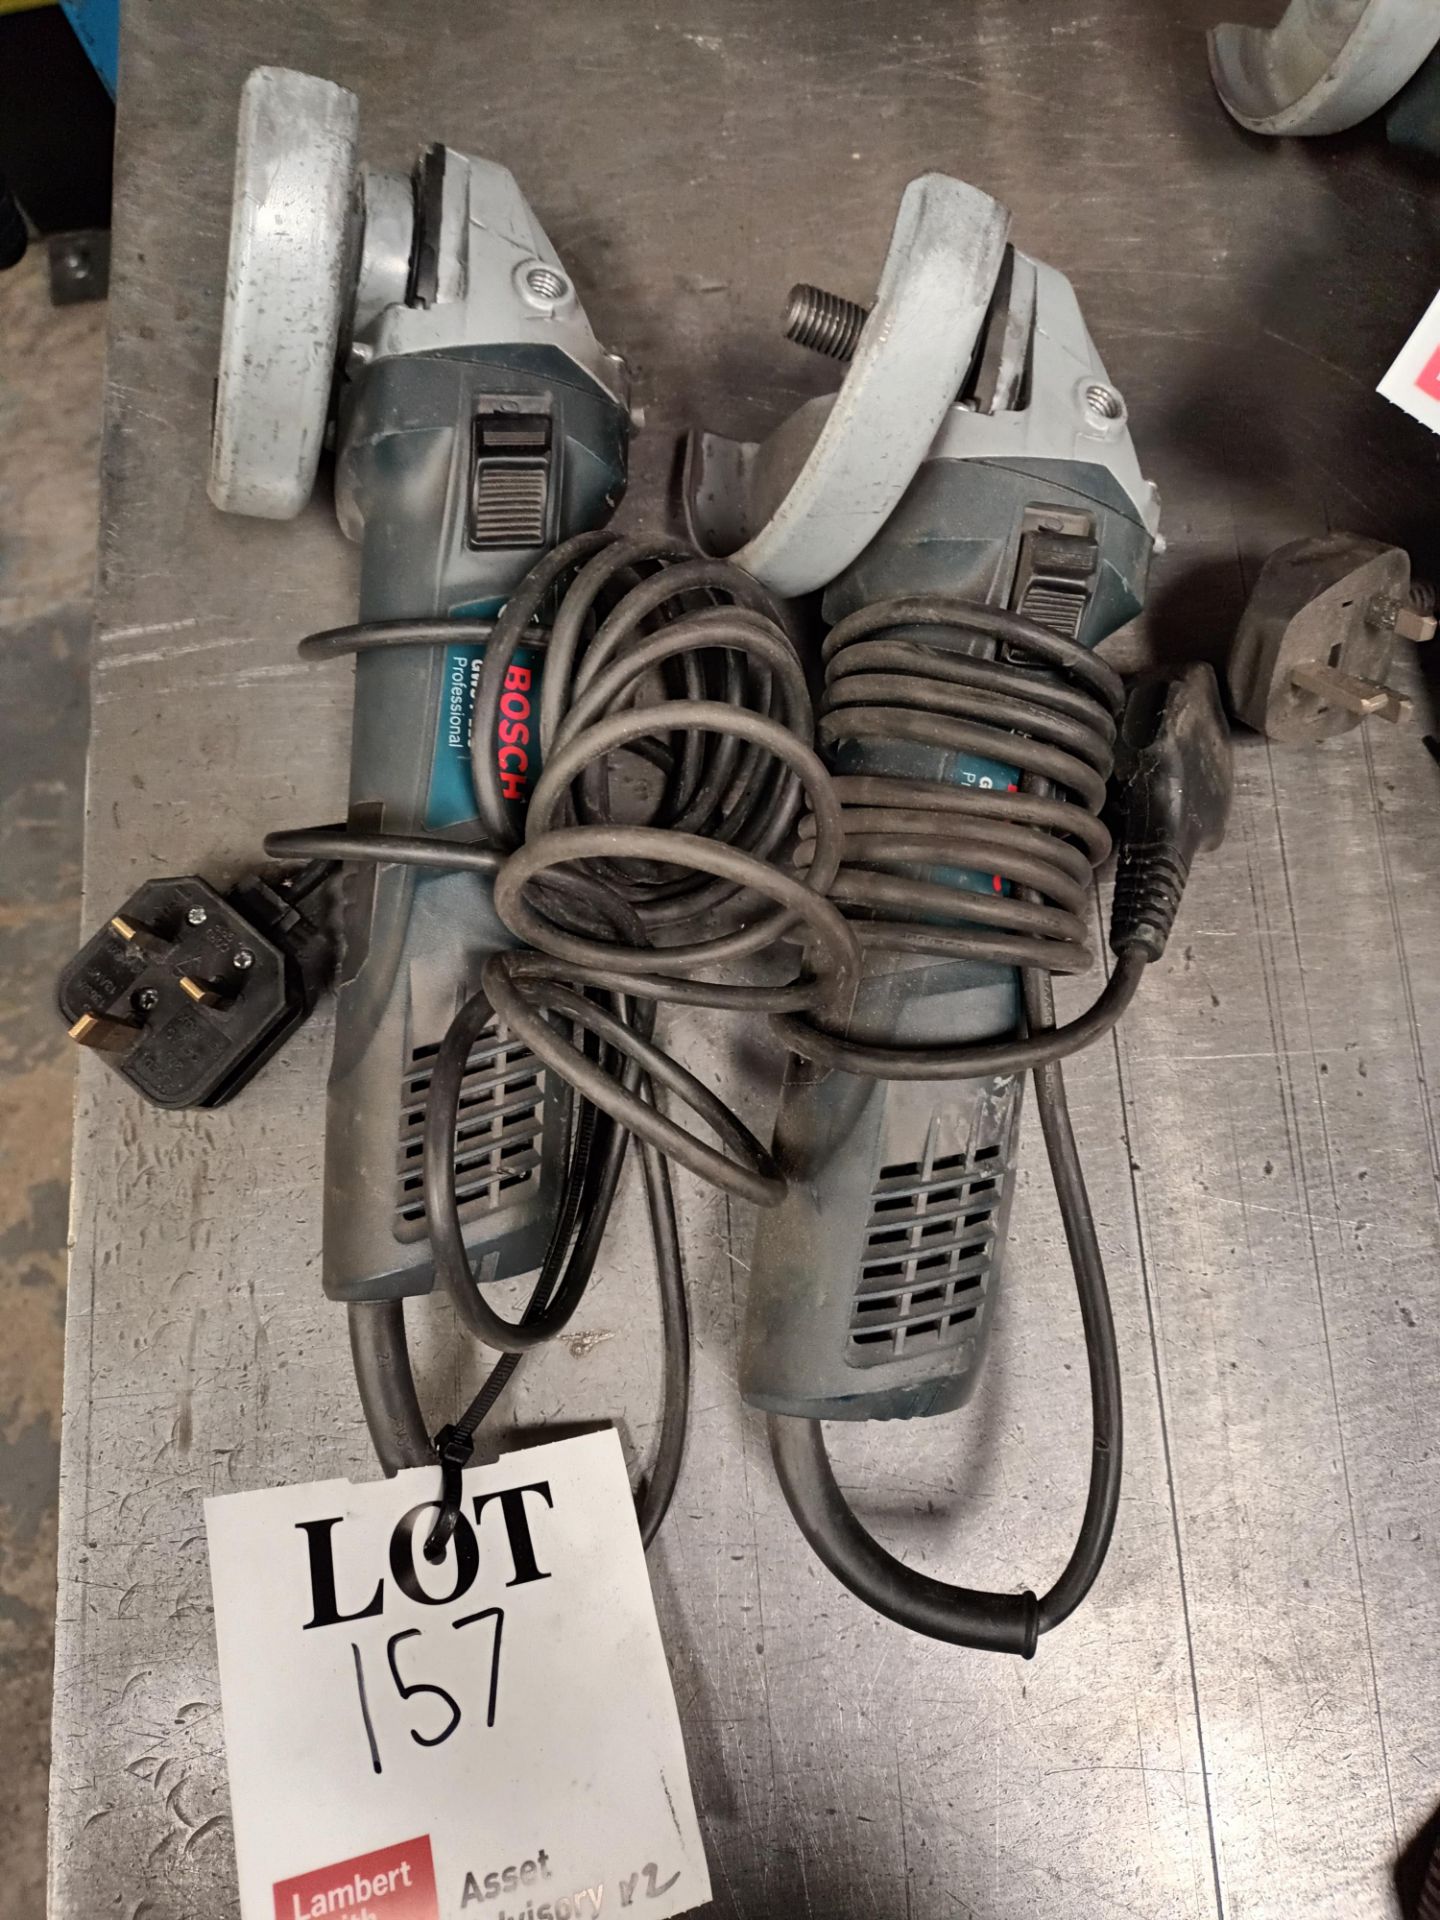 Two Bosch GWS 7-115 angle grinders, 240v